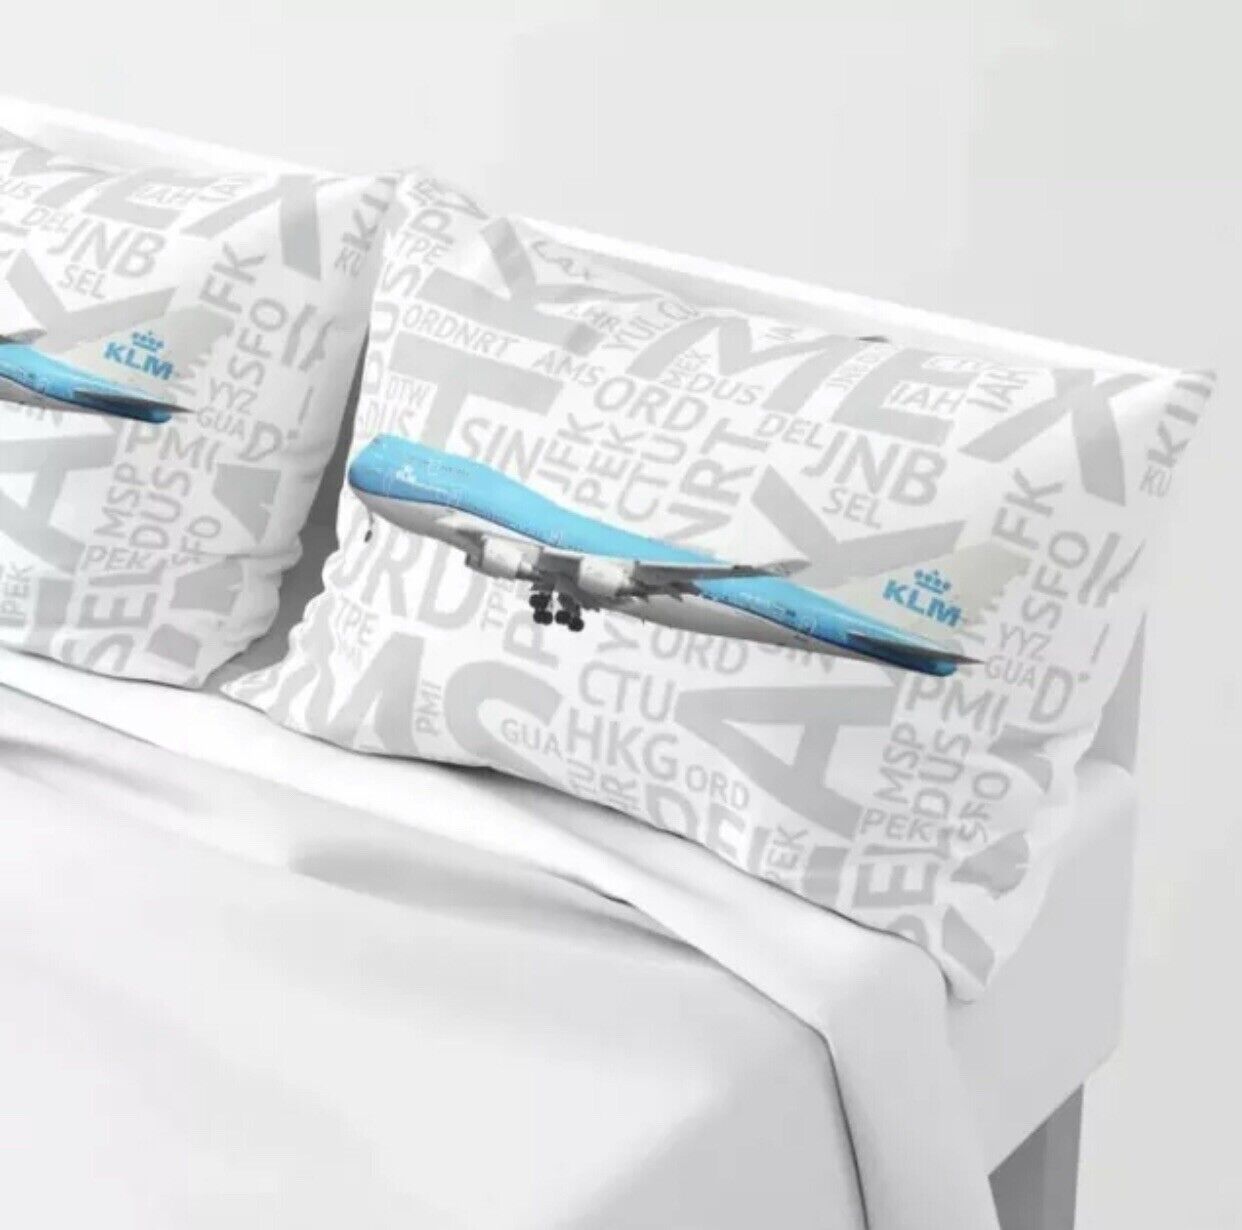 KLM 747-400 with Airport Codes - Standard Set of Pillow Shams